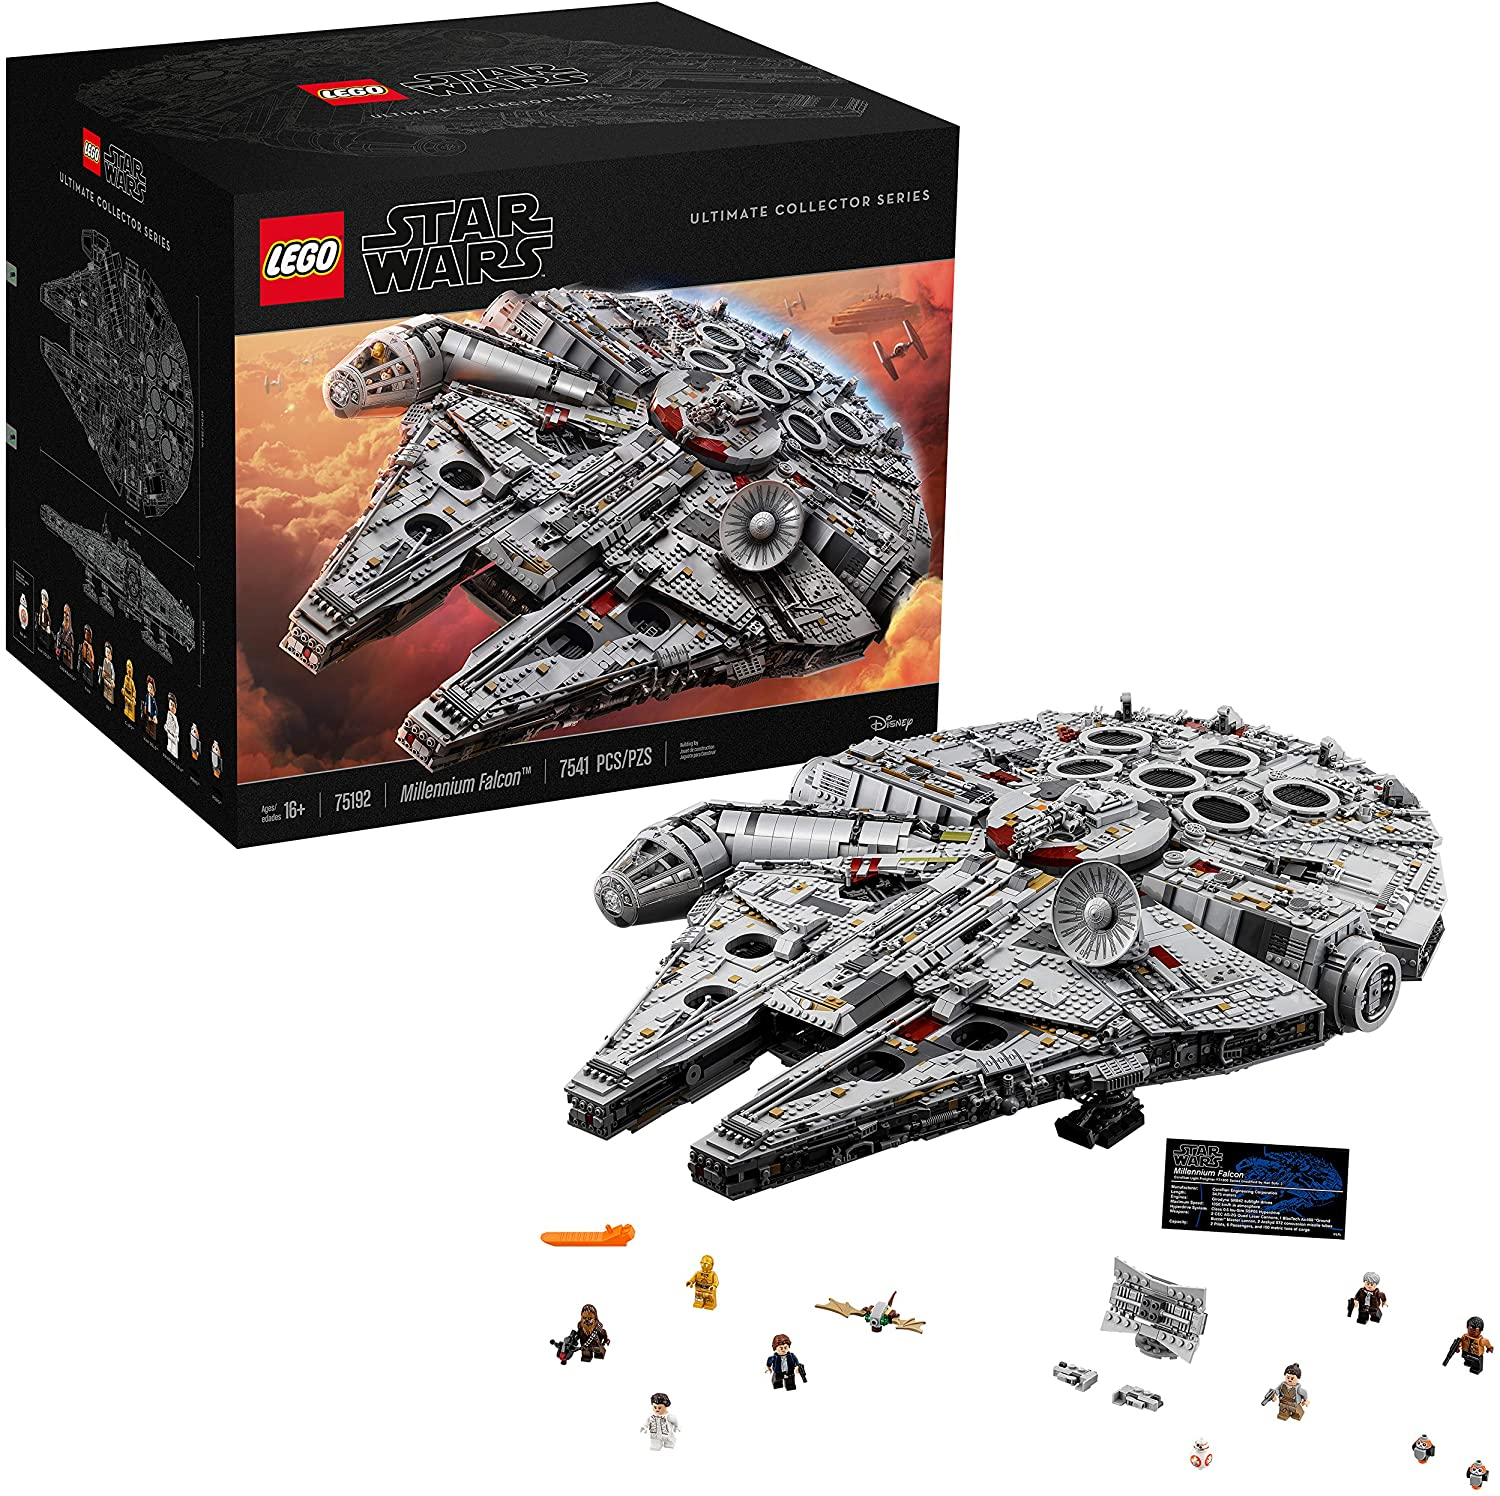 LEGO Star Wars Ultimate Millennium Falcon 75192 Collectable $799